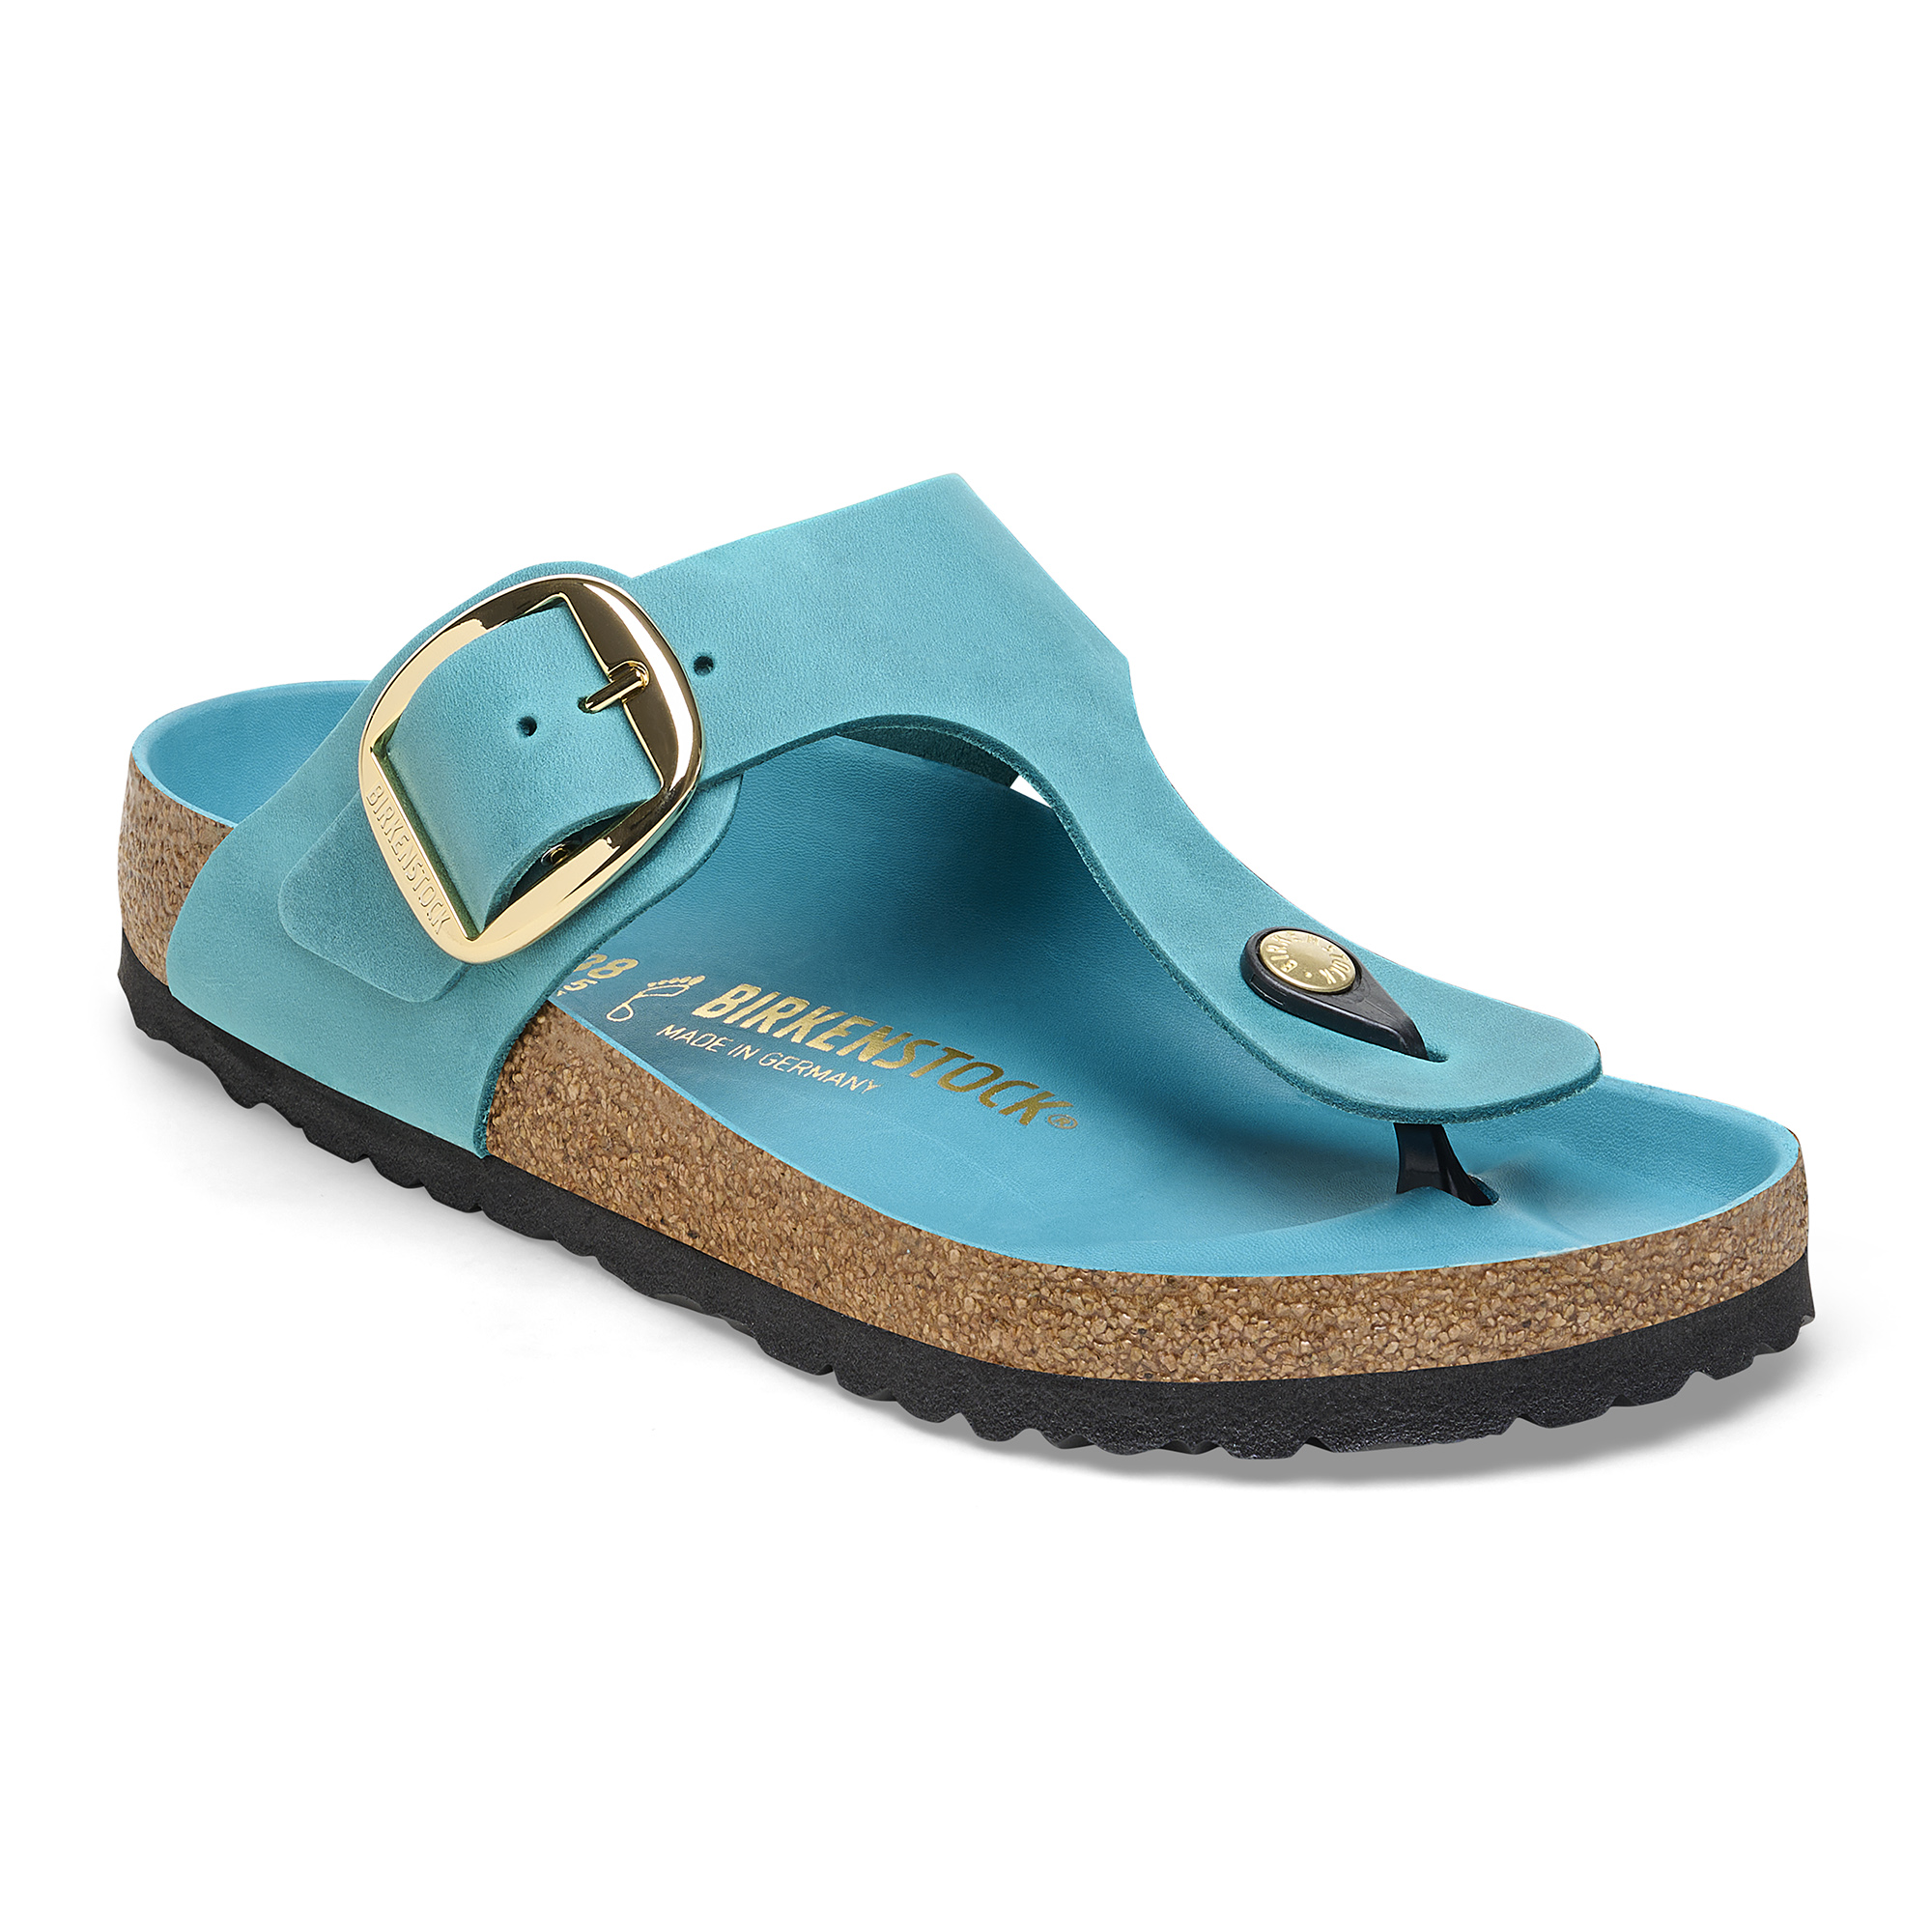 Gizeh Big Buckle Smooth Leather Biscay Bay | BIRKENSTOCK